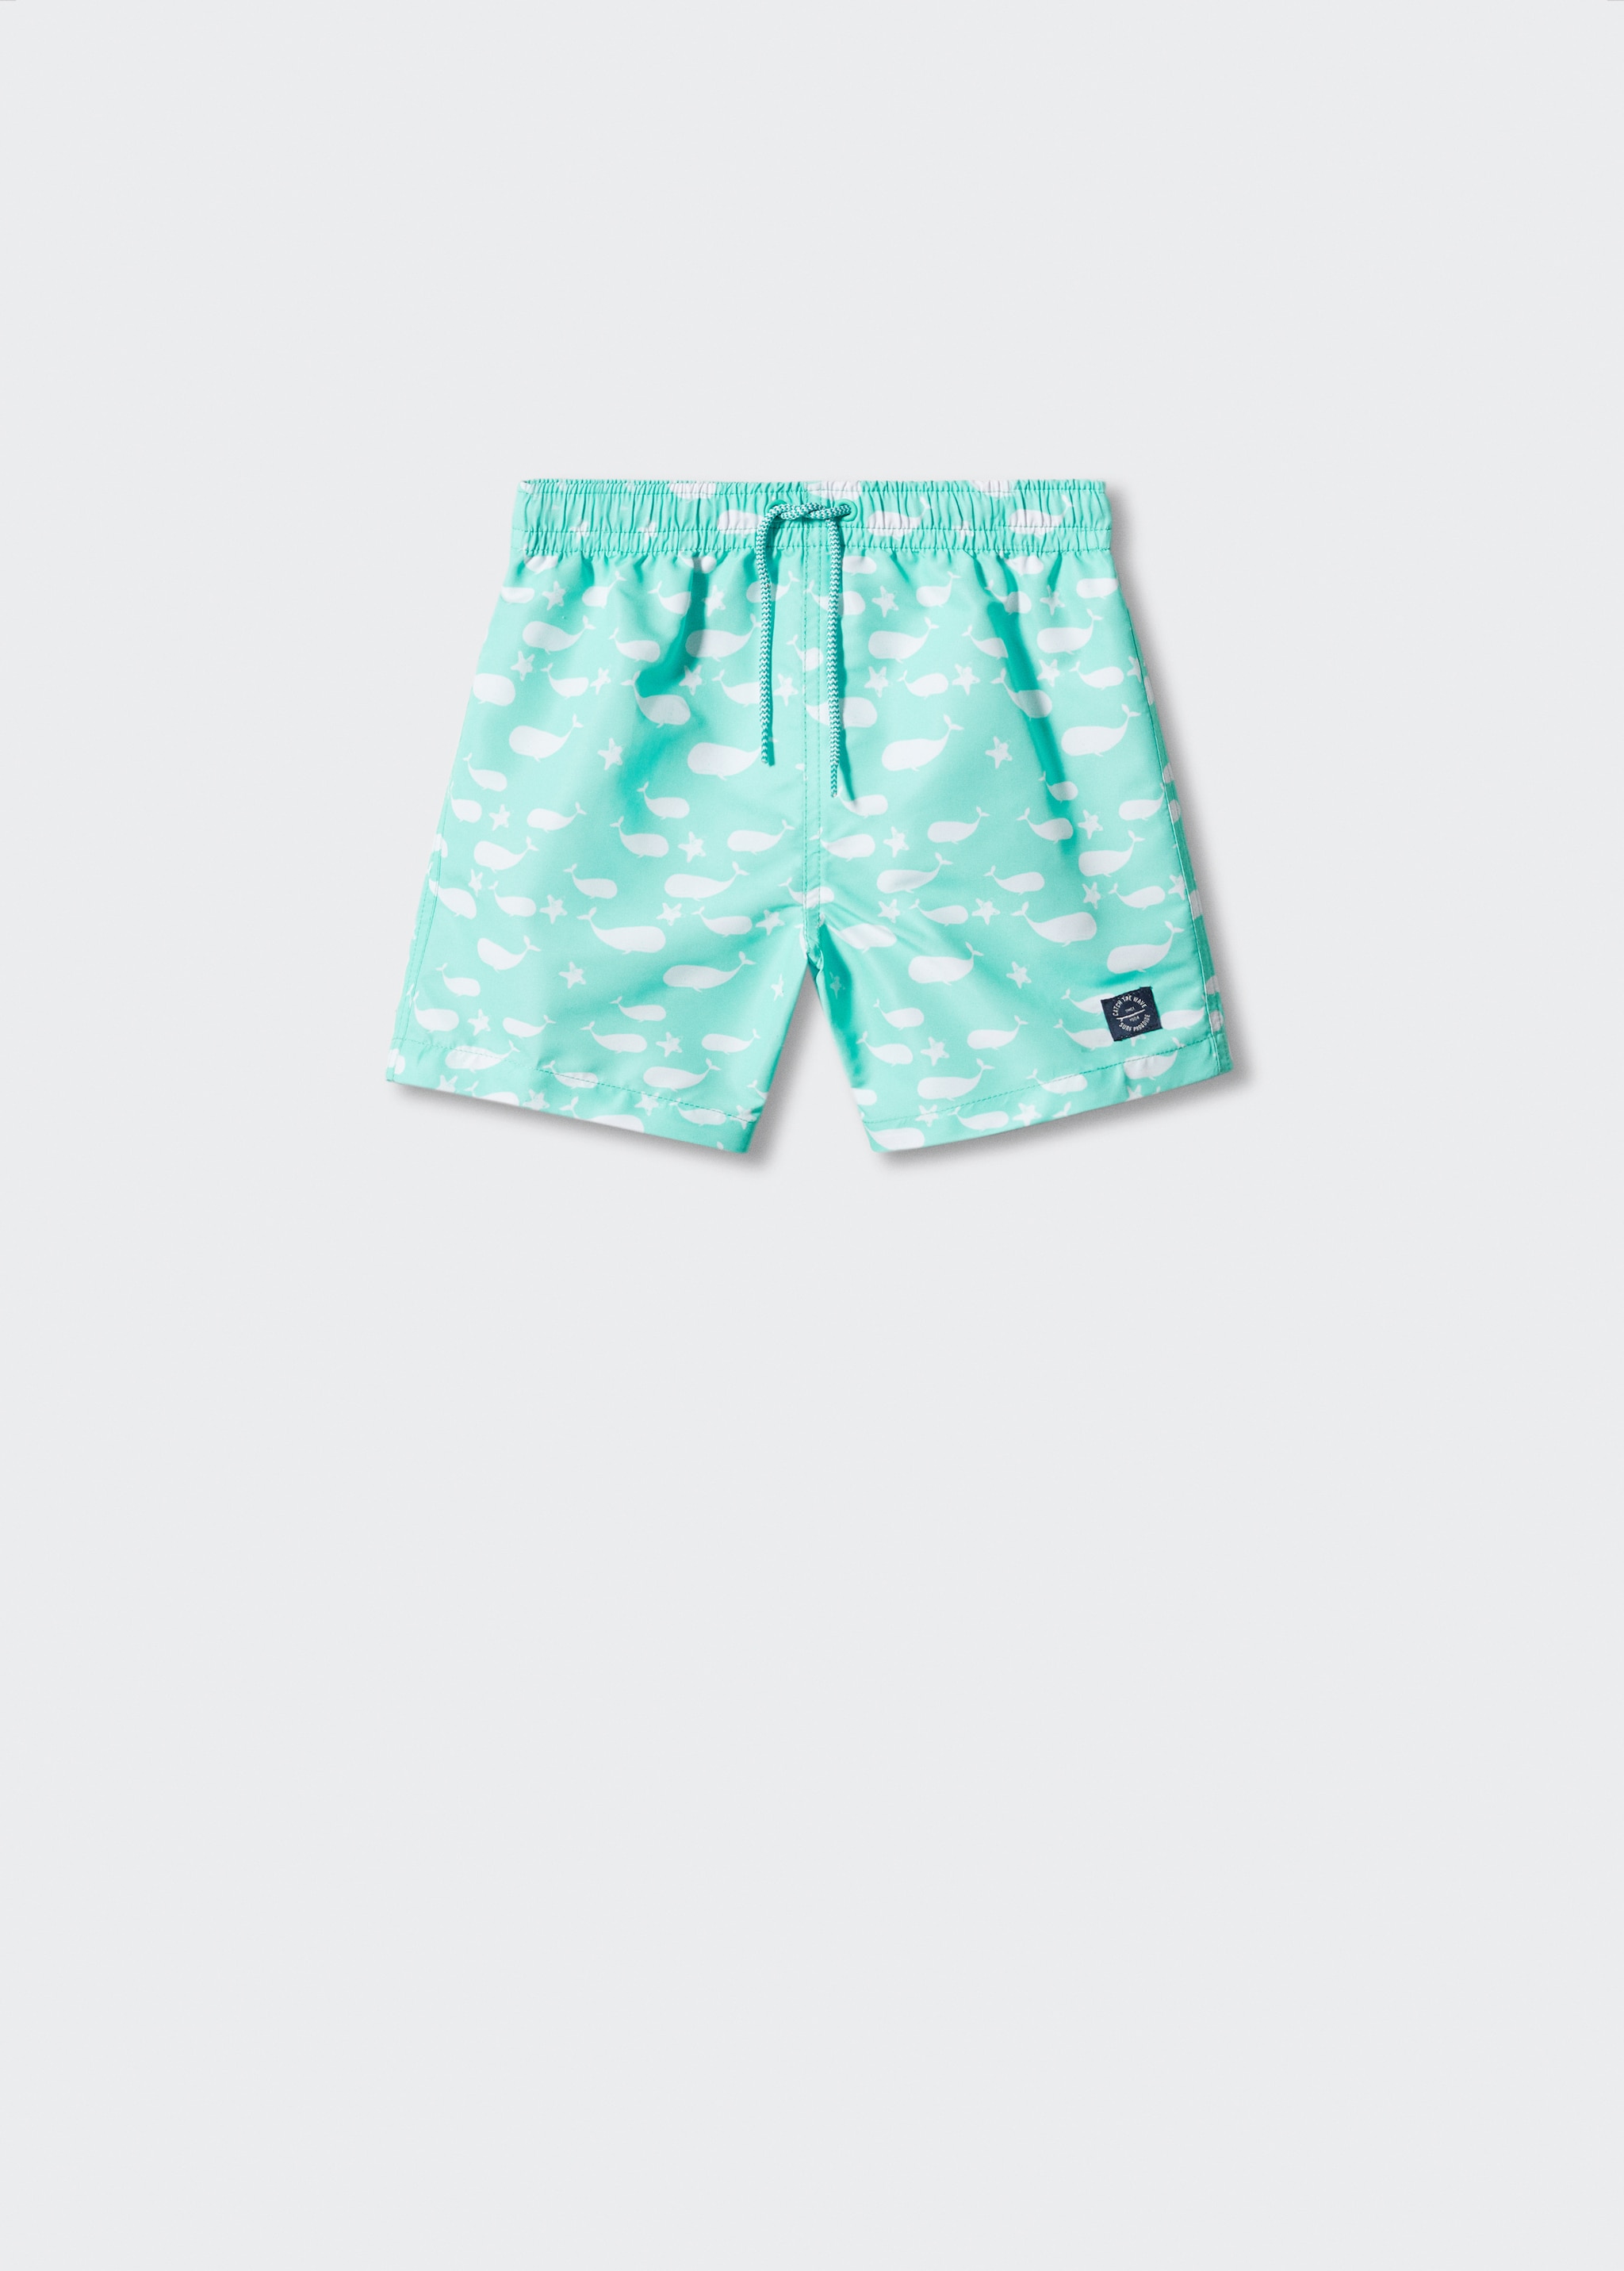 Printed swimming trunks - Article without model